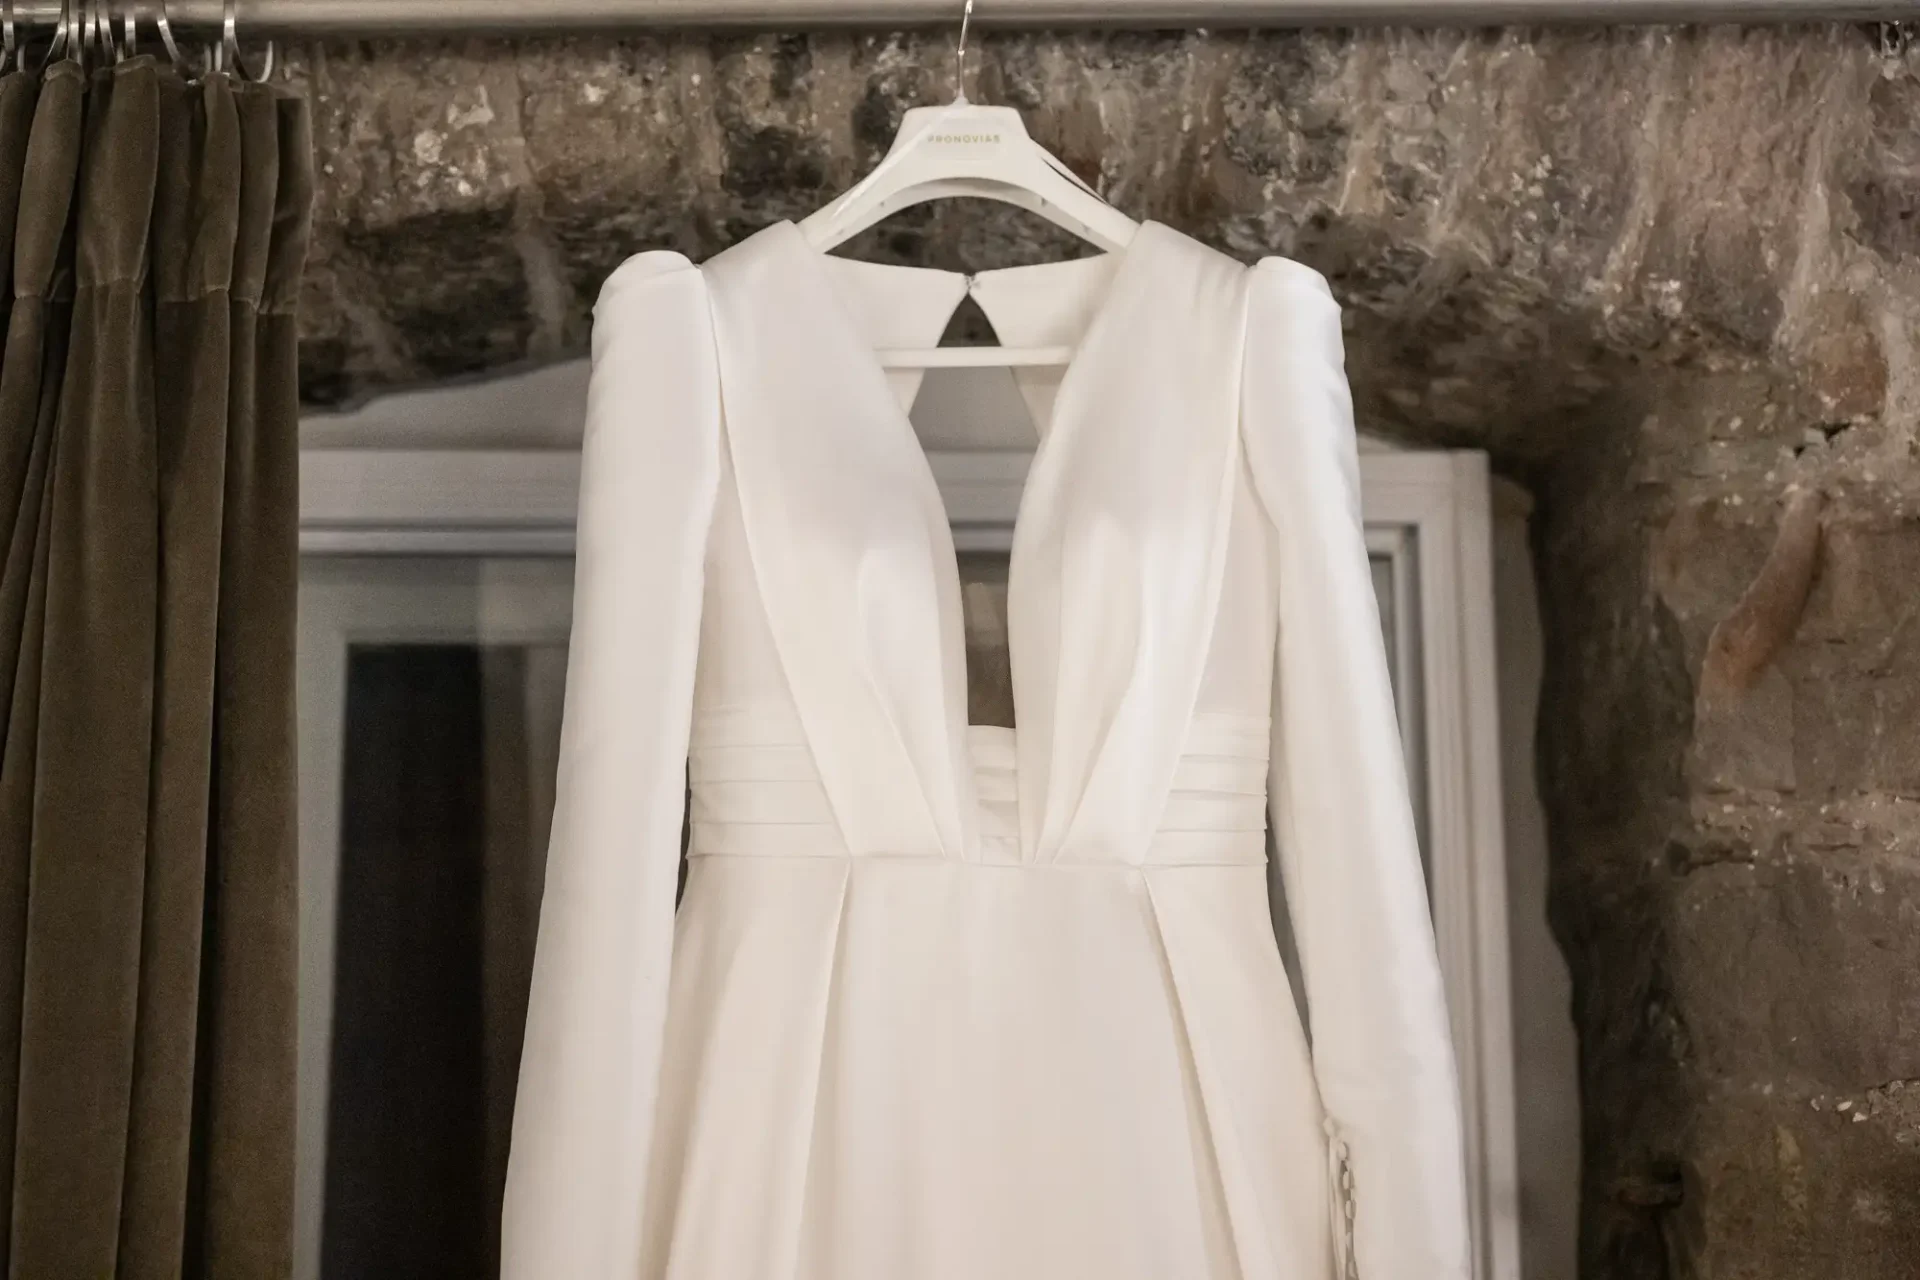 An elegant white wedding dress with long sleeves and a v-neckline, hanging on a hanger against a rustic stone wall backdrop.